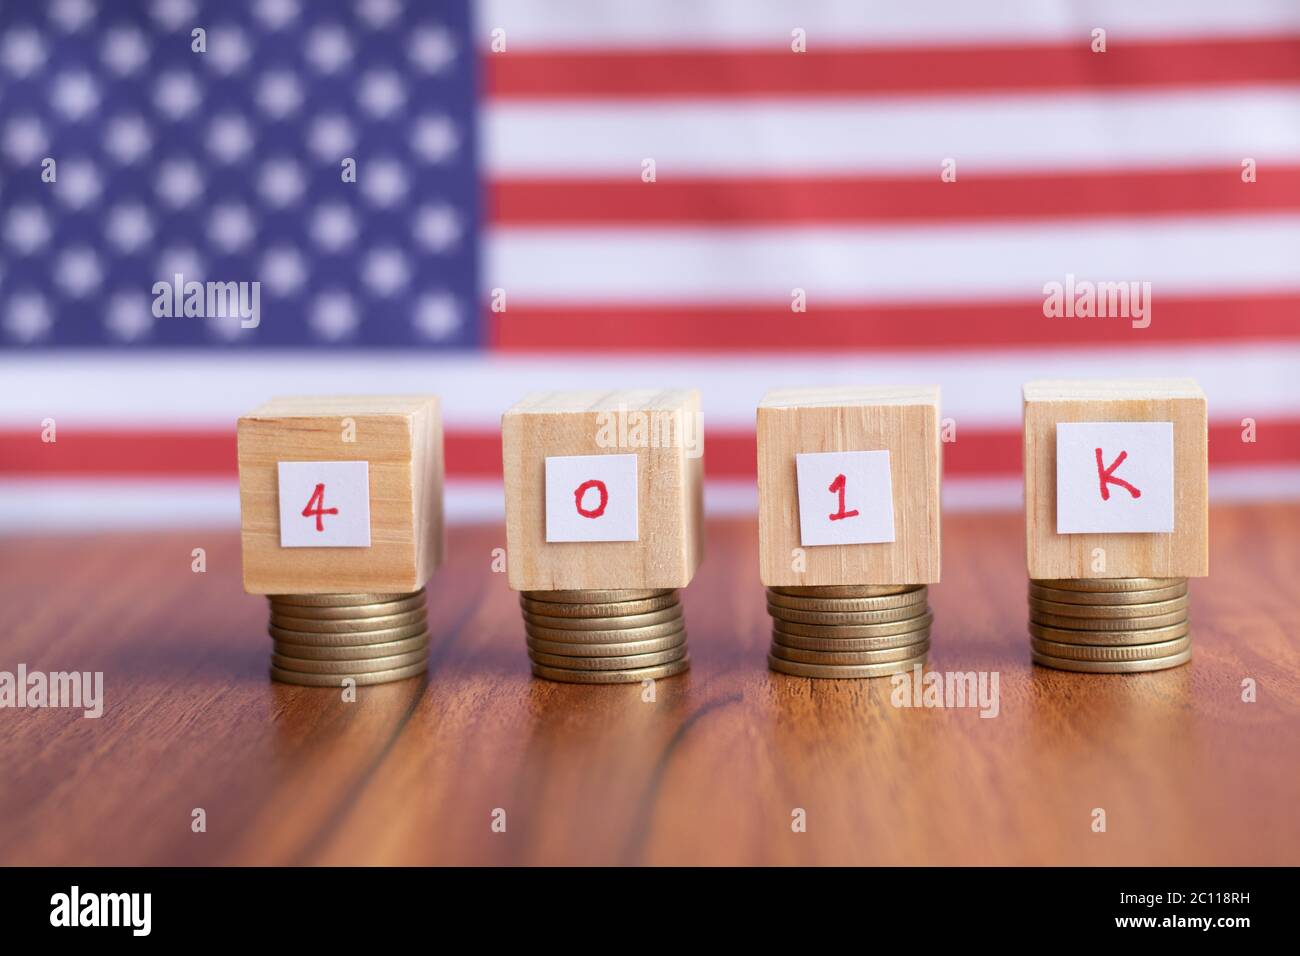 Concept of 401k retirement plan savings showing with US or american flag as background Stock Photo